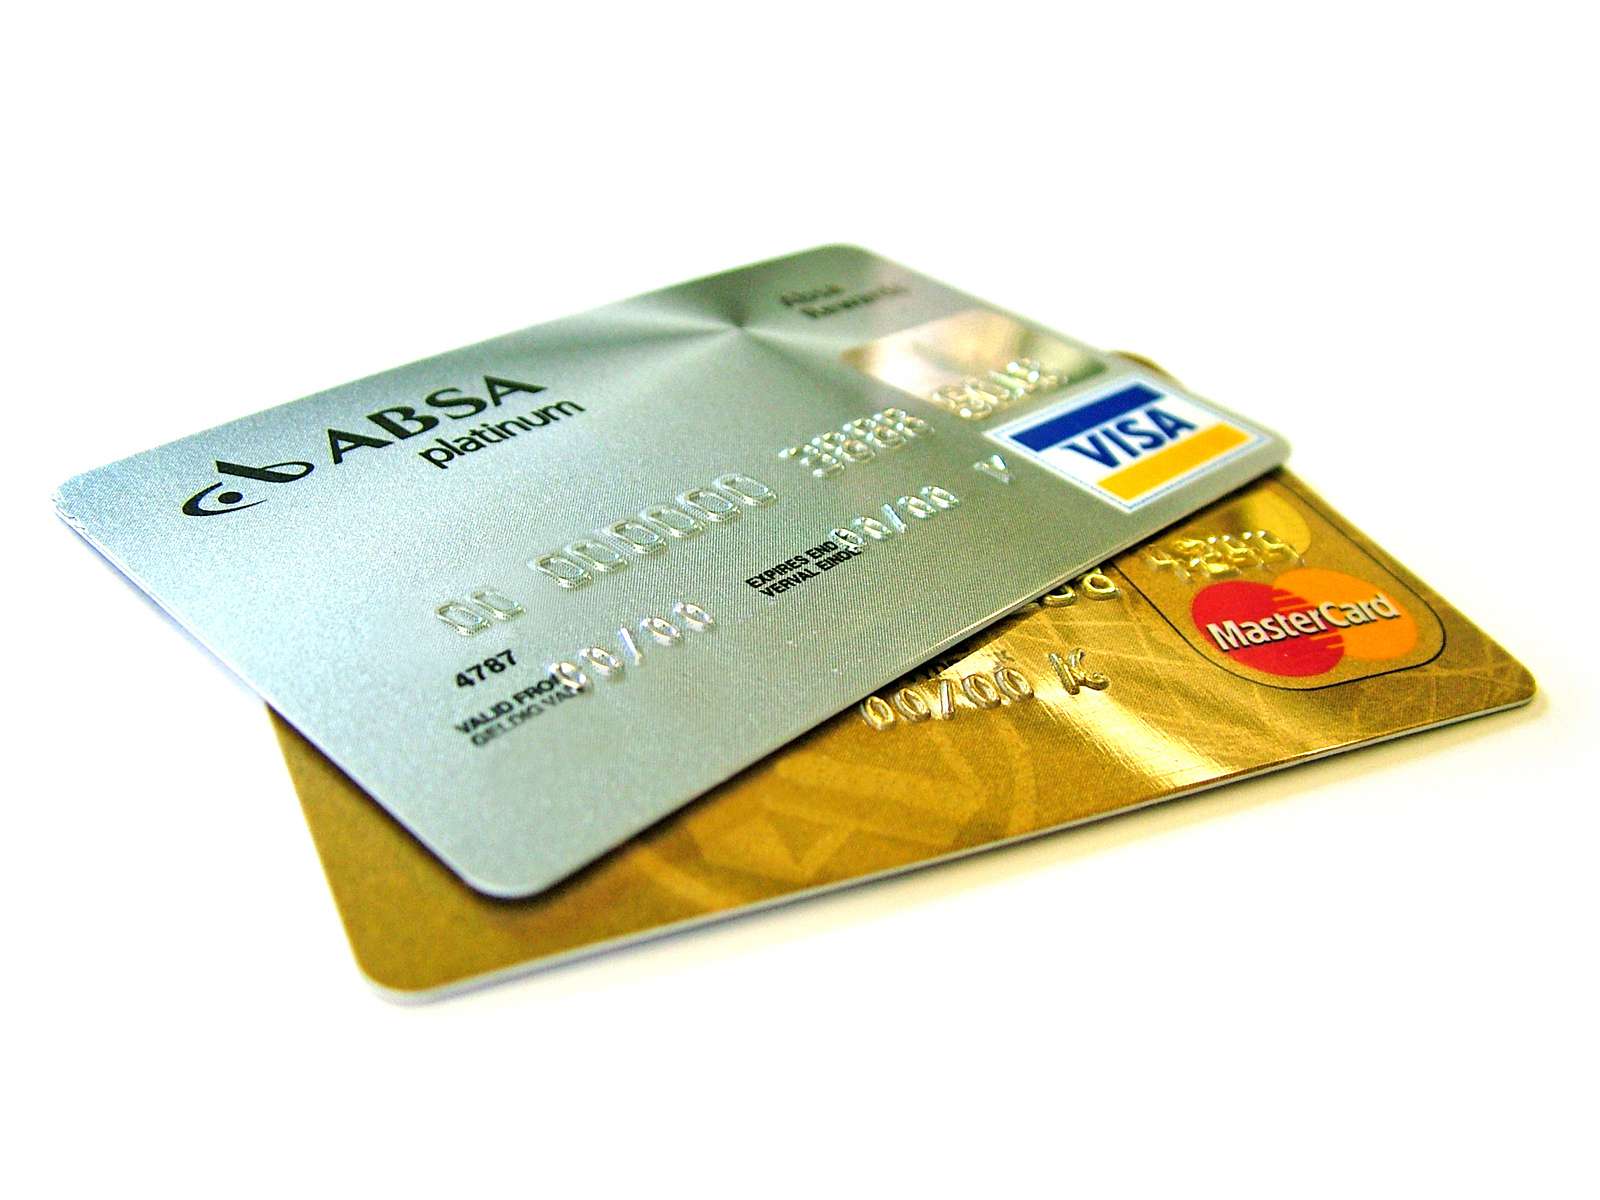 Card scammers arrested for fraud and theft